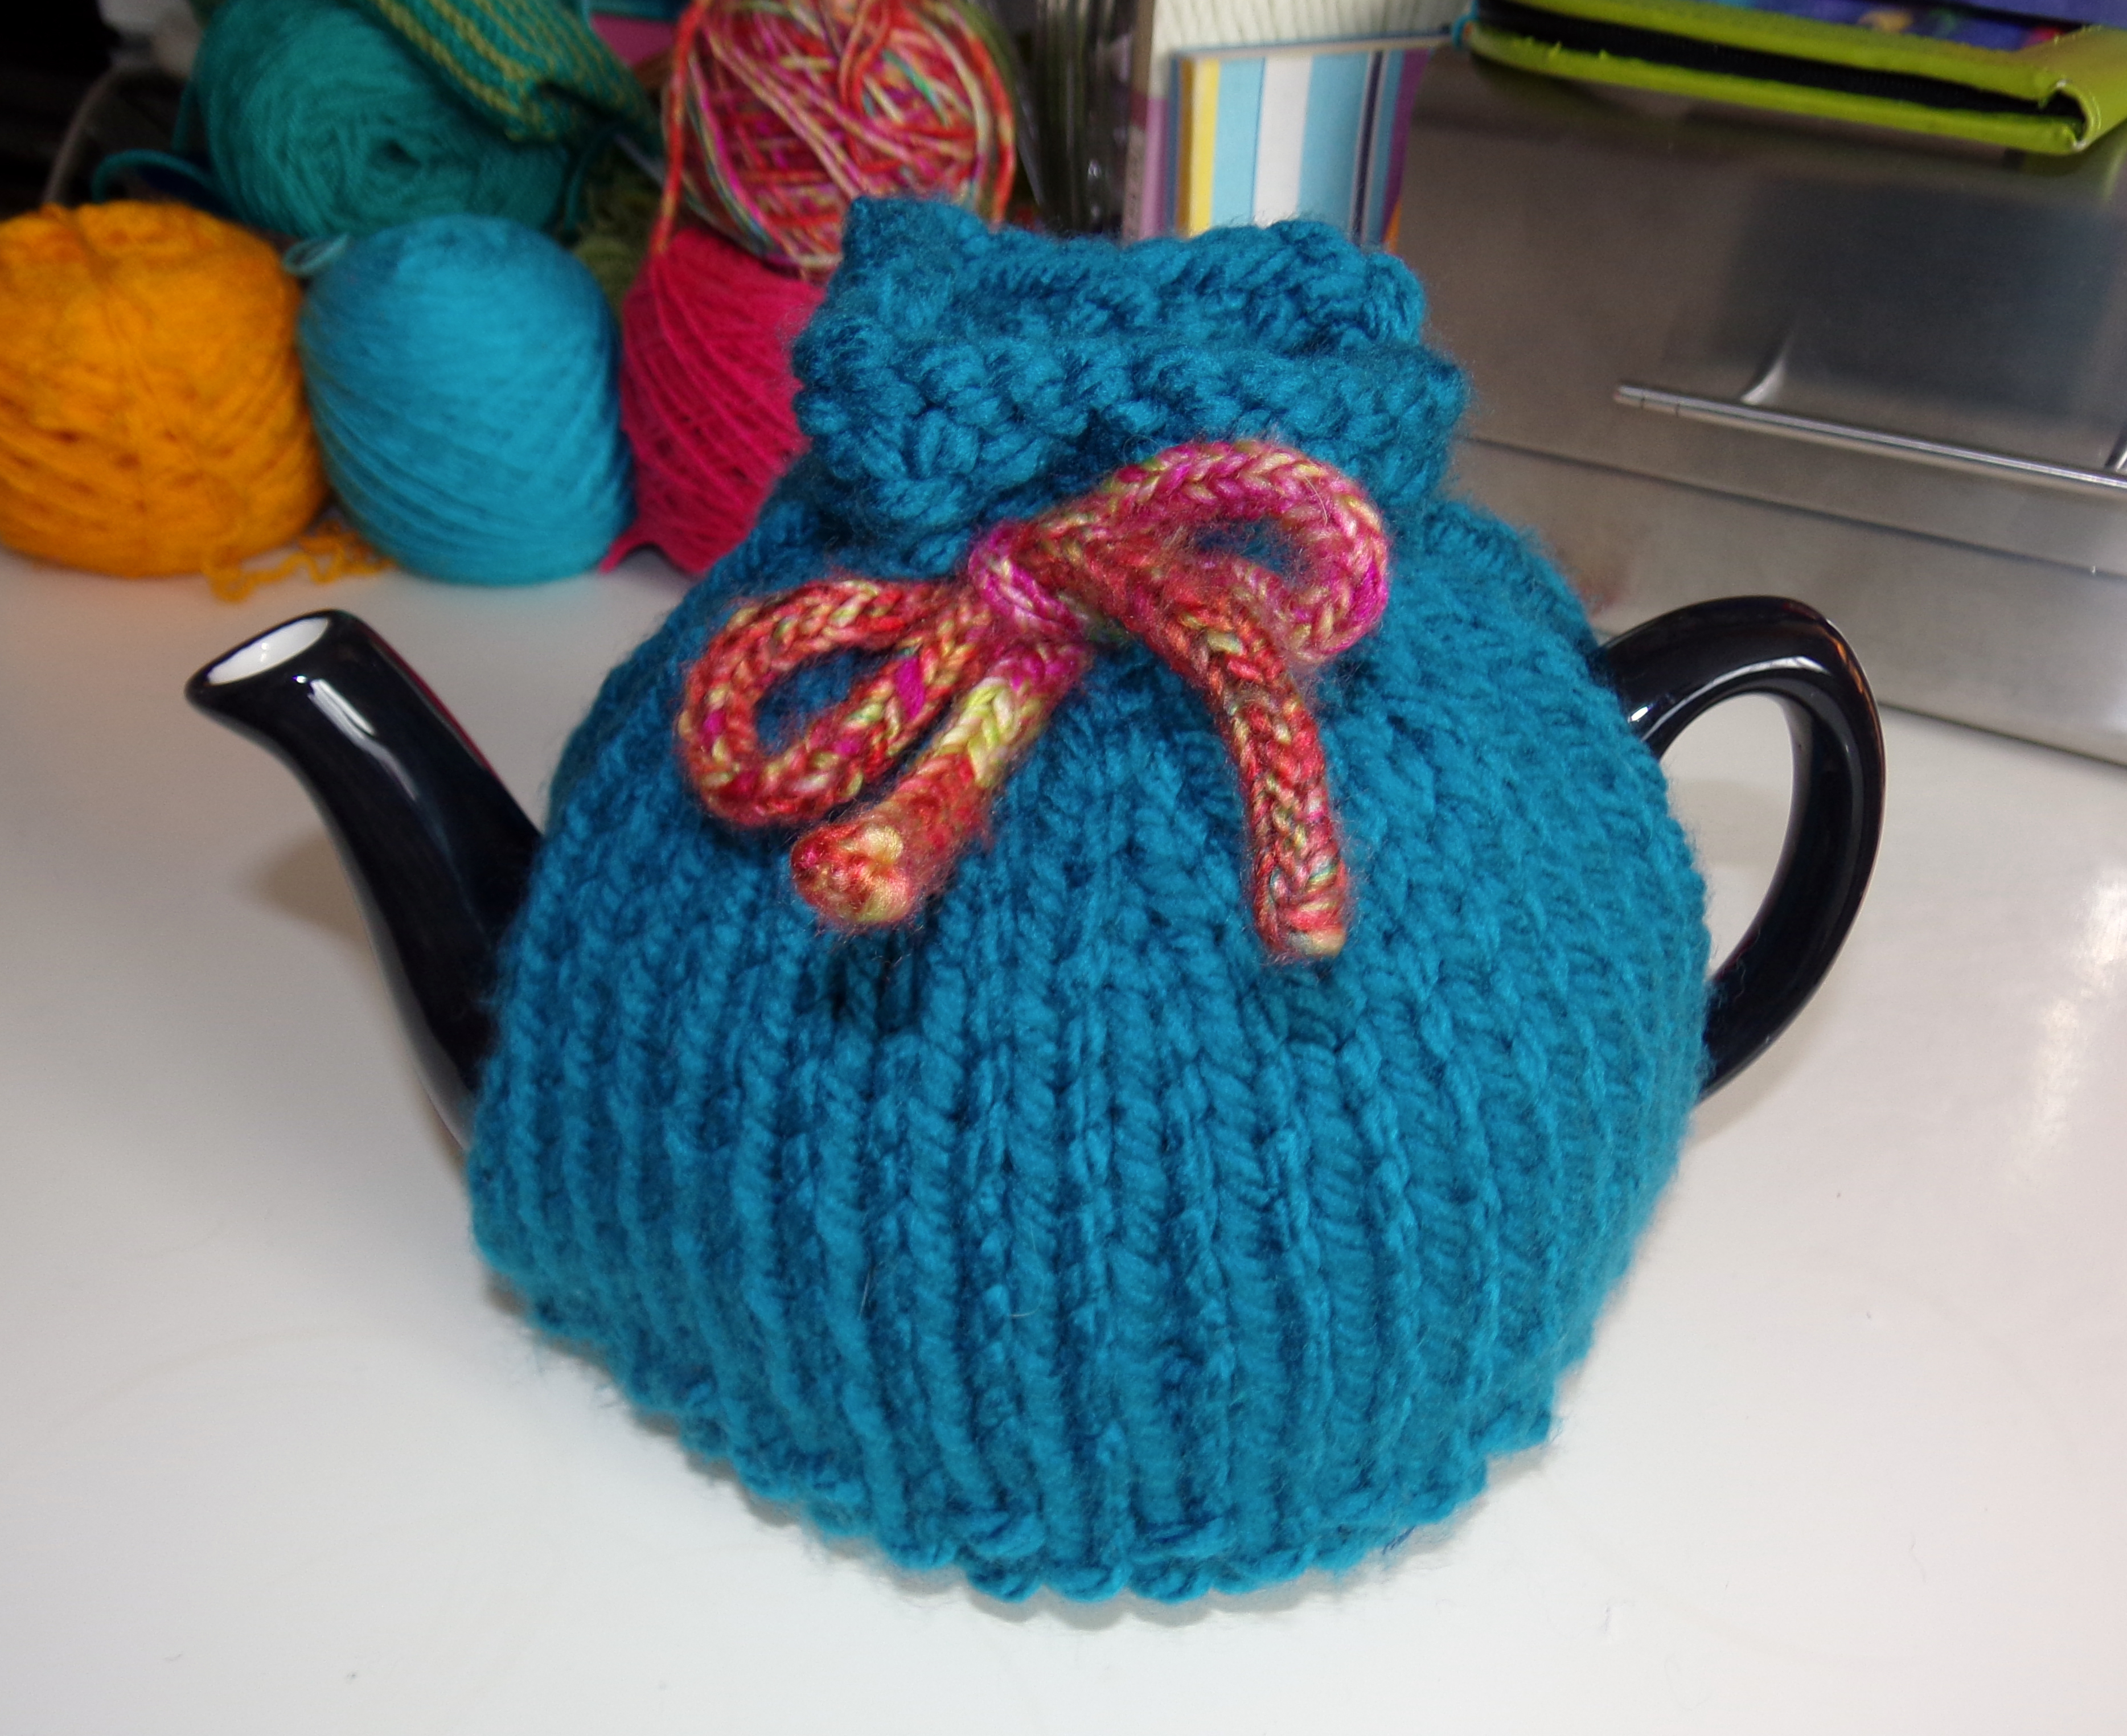 Tea Cosy Knitting Patterns Easy Three Free Tea Cosy Patterns Reviewed Or Why Tea Pots Are Better